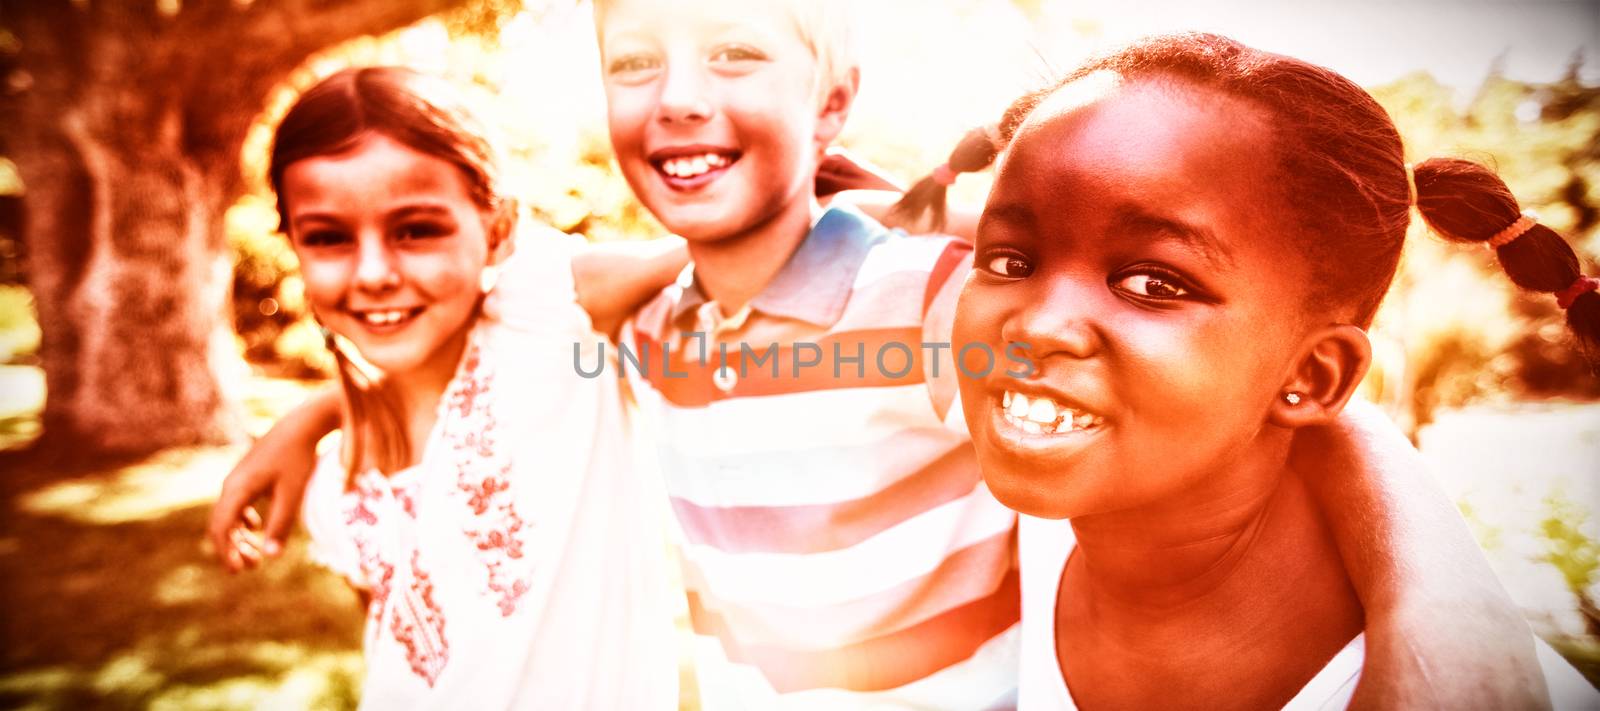 Kids posing together during a sunny day at camera in the park